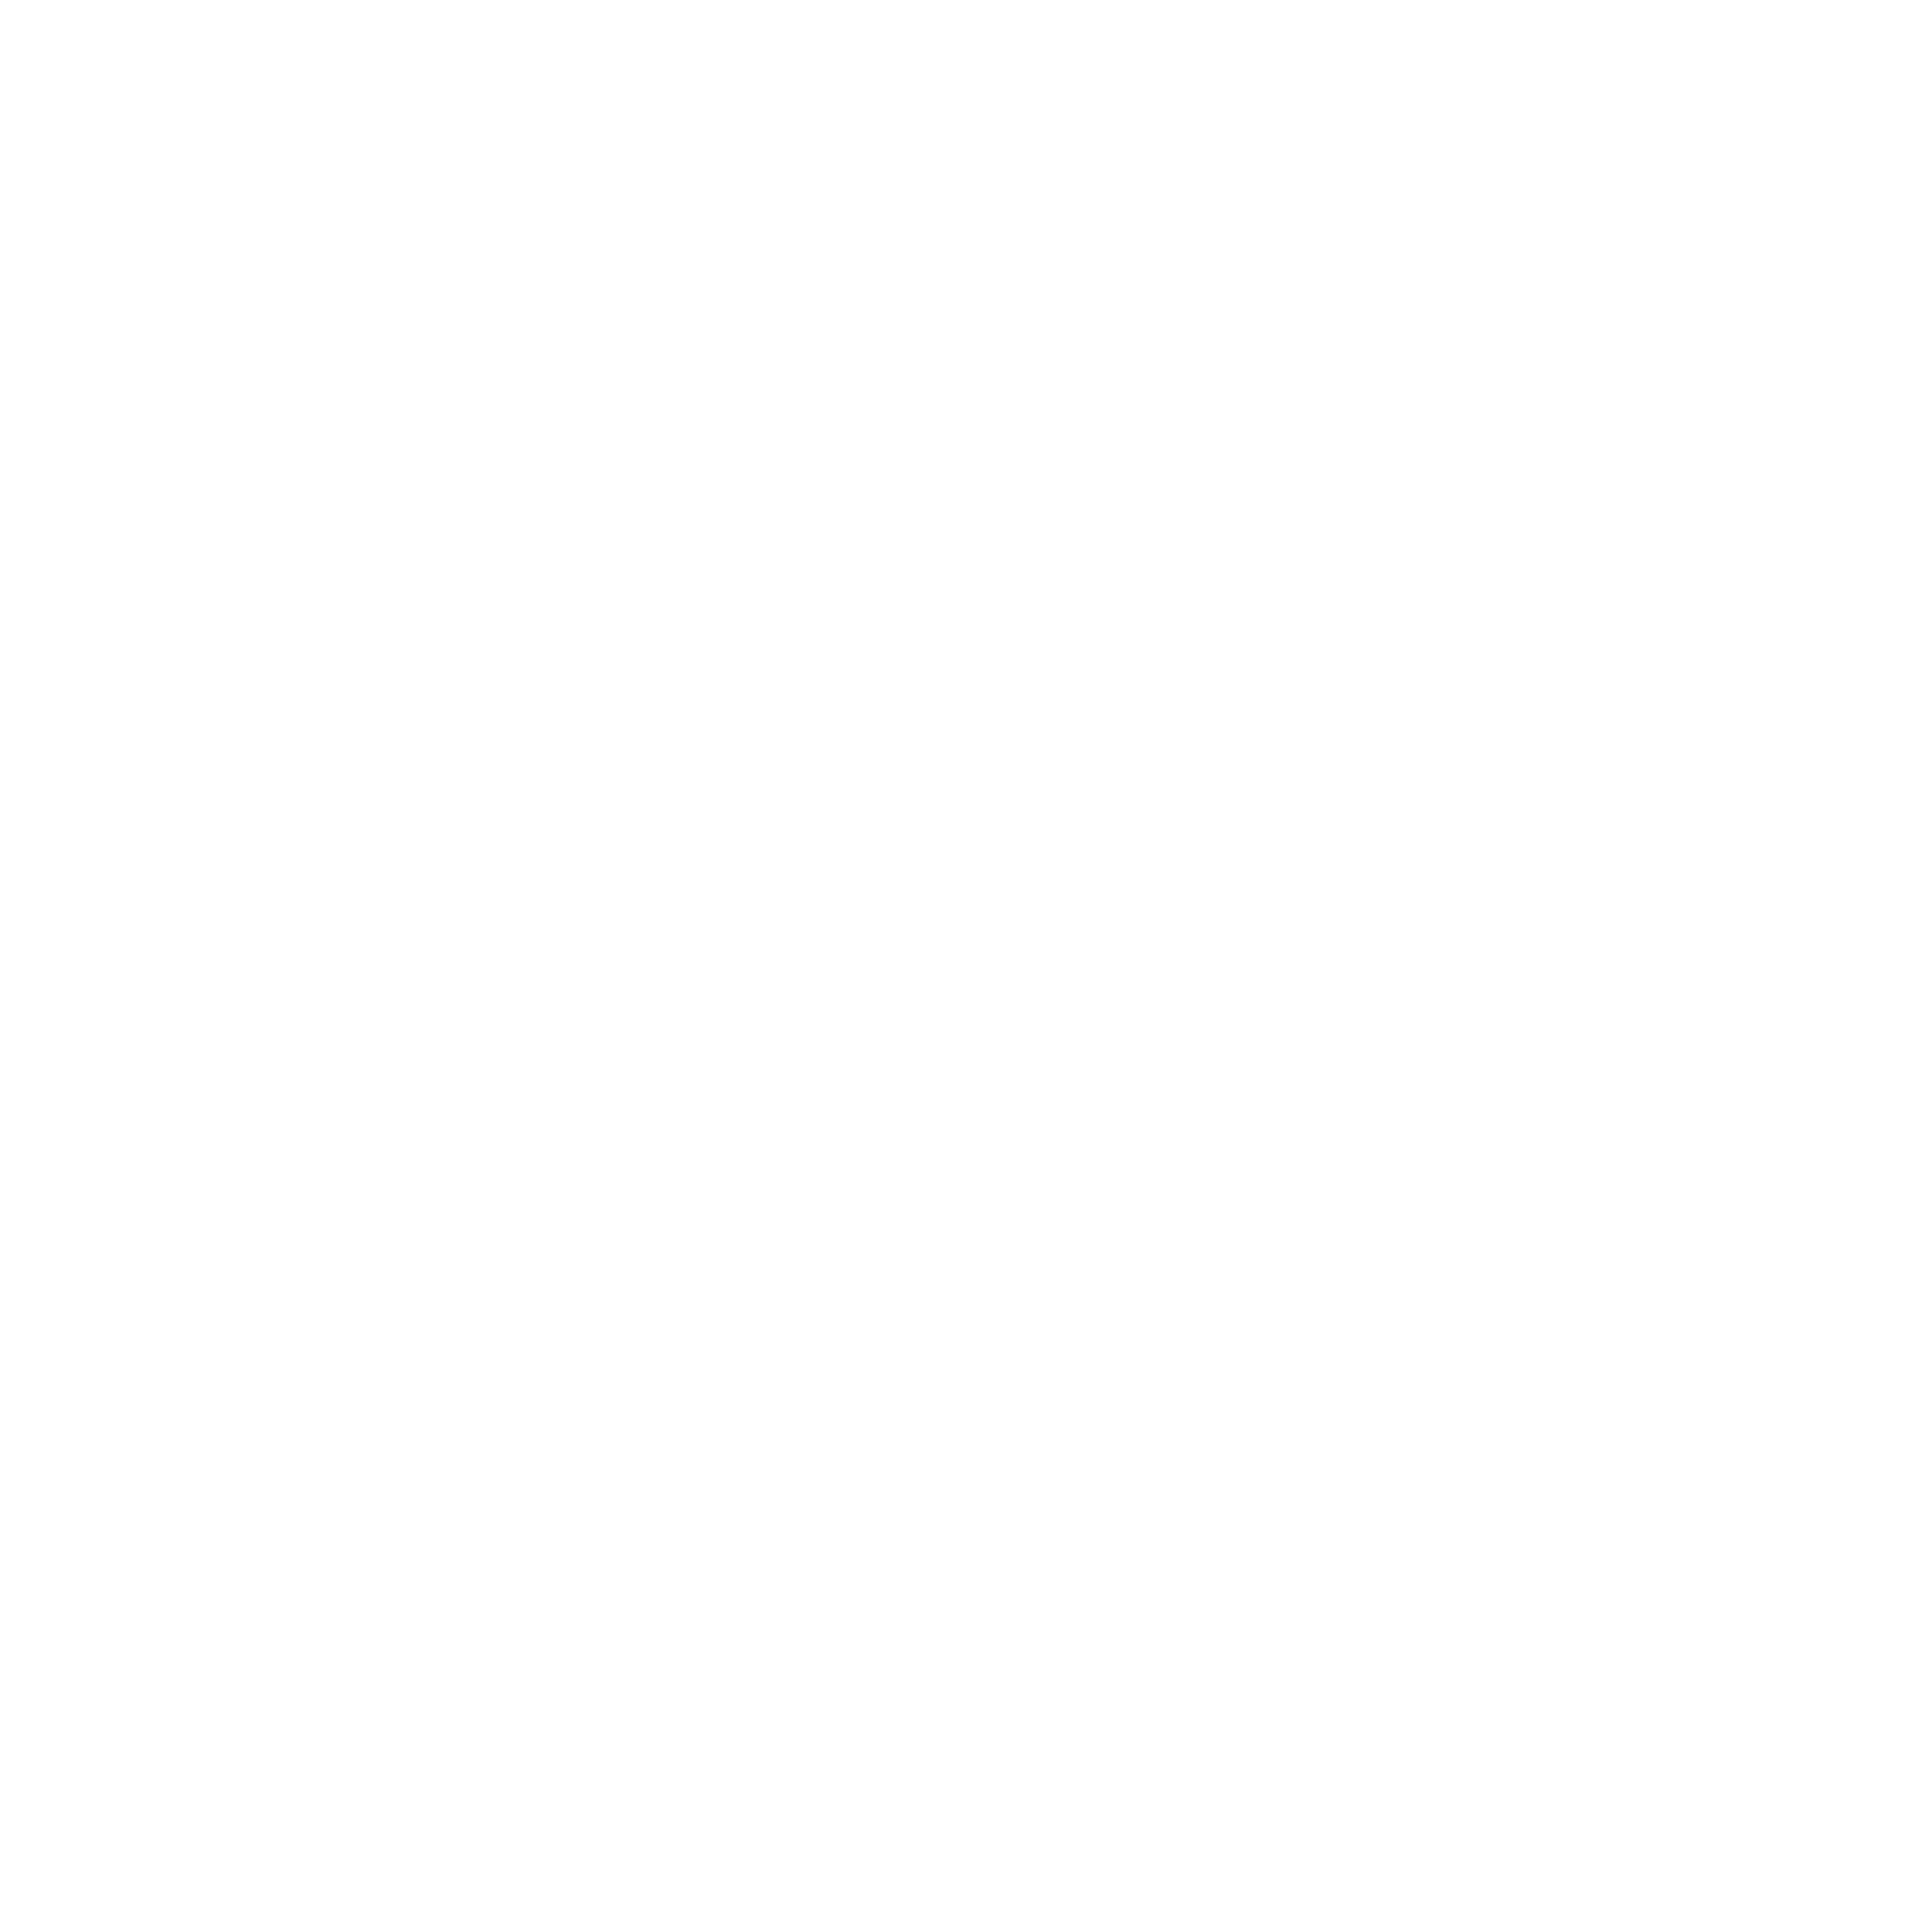 American Jewish Joint Distribution Committee Inc. logo